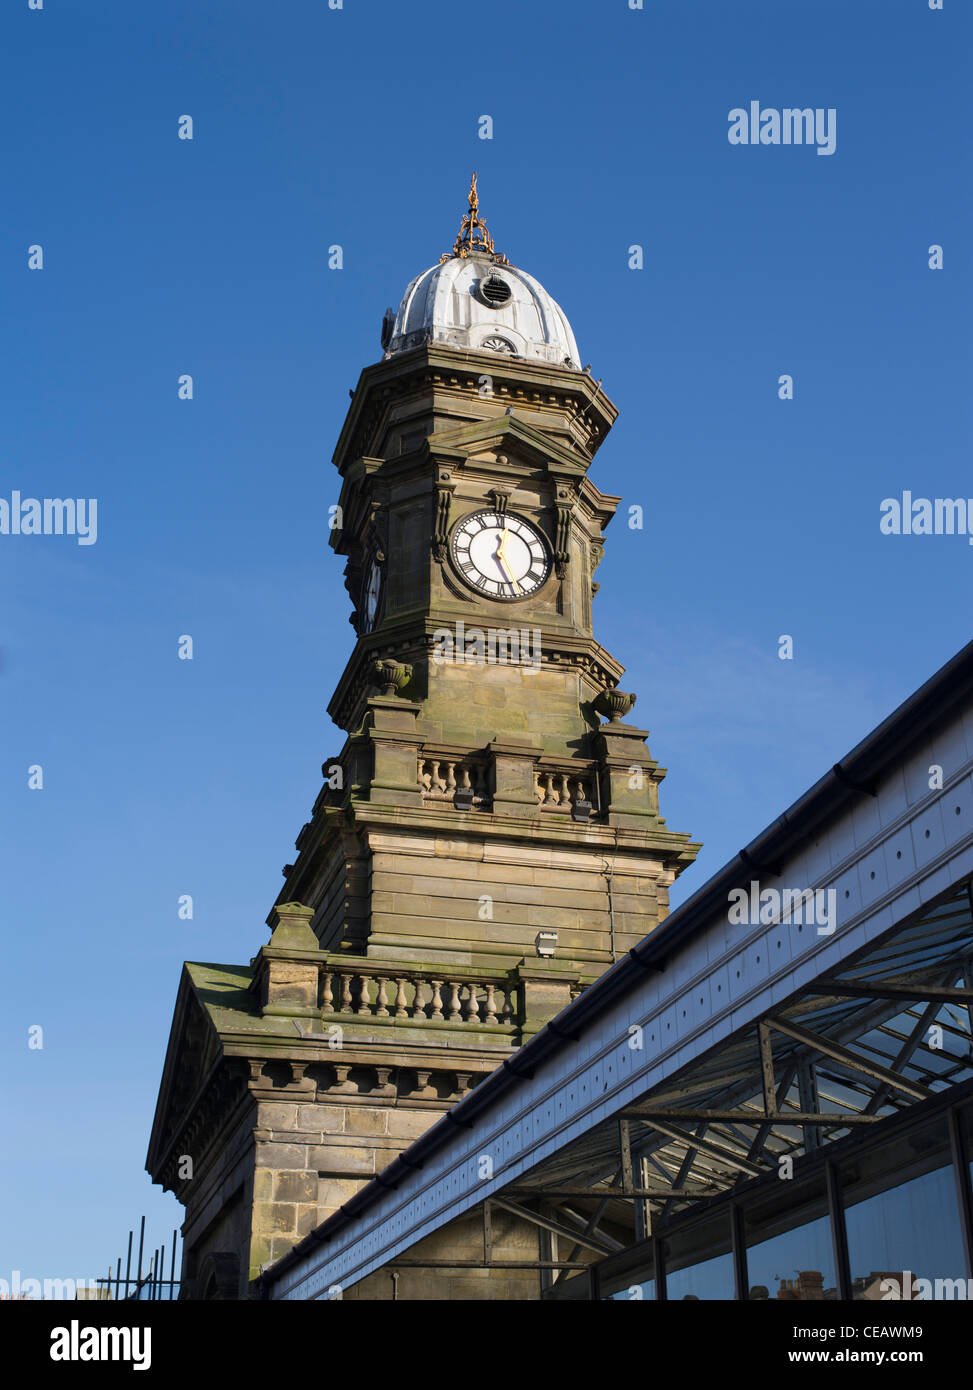 dh  SCARBOROUGH NORTH YORKSHIRE Old Railway station clock tower uk Stock Photo